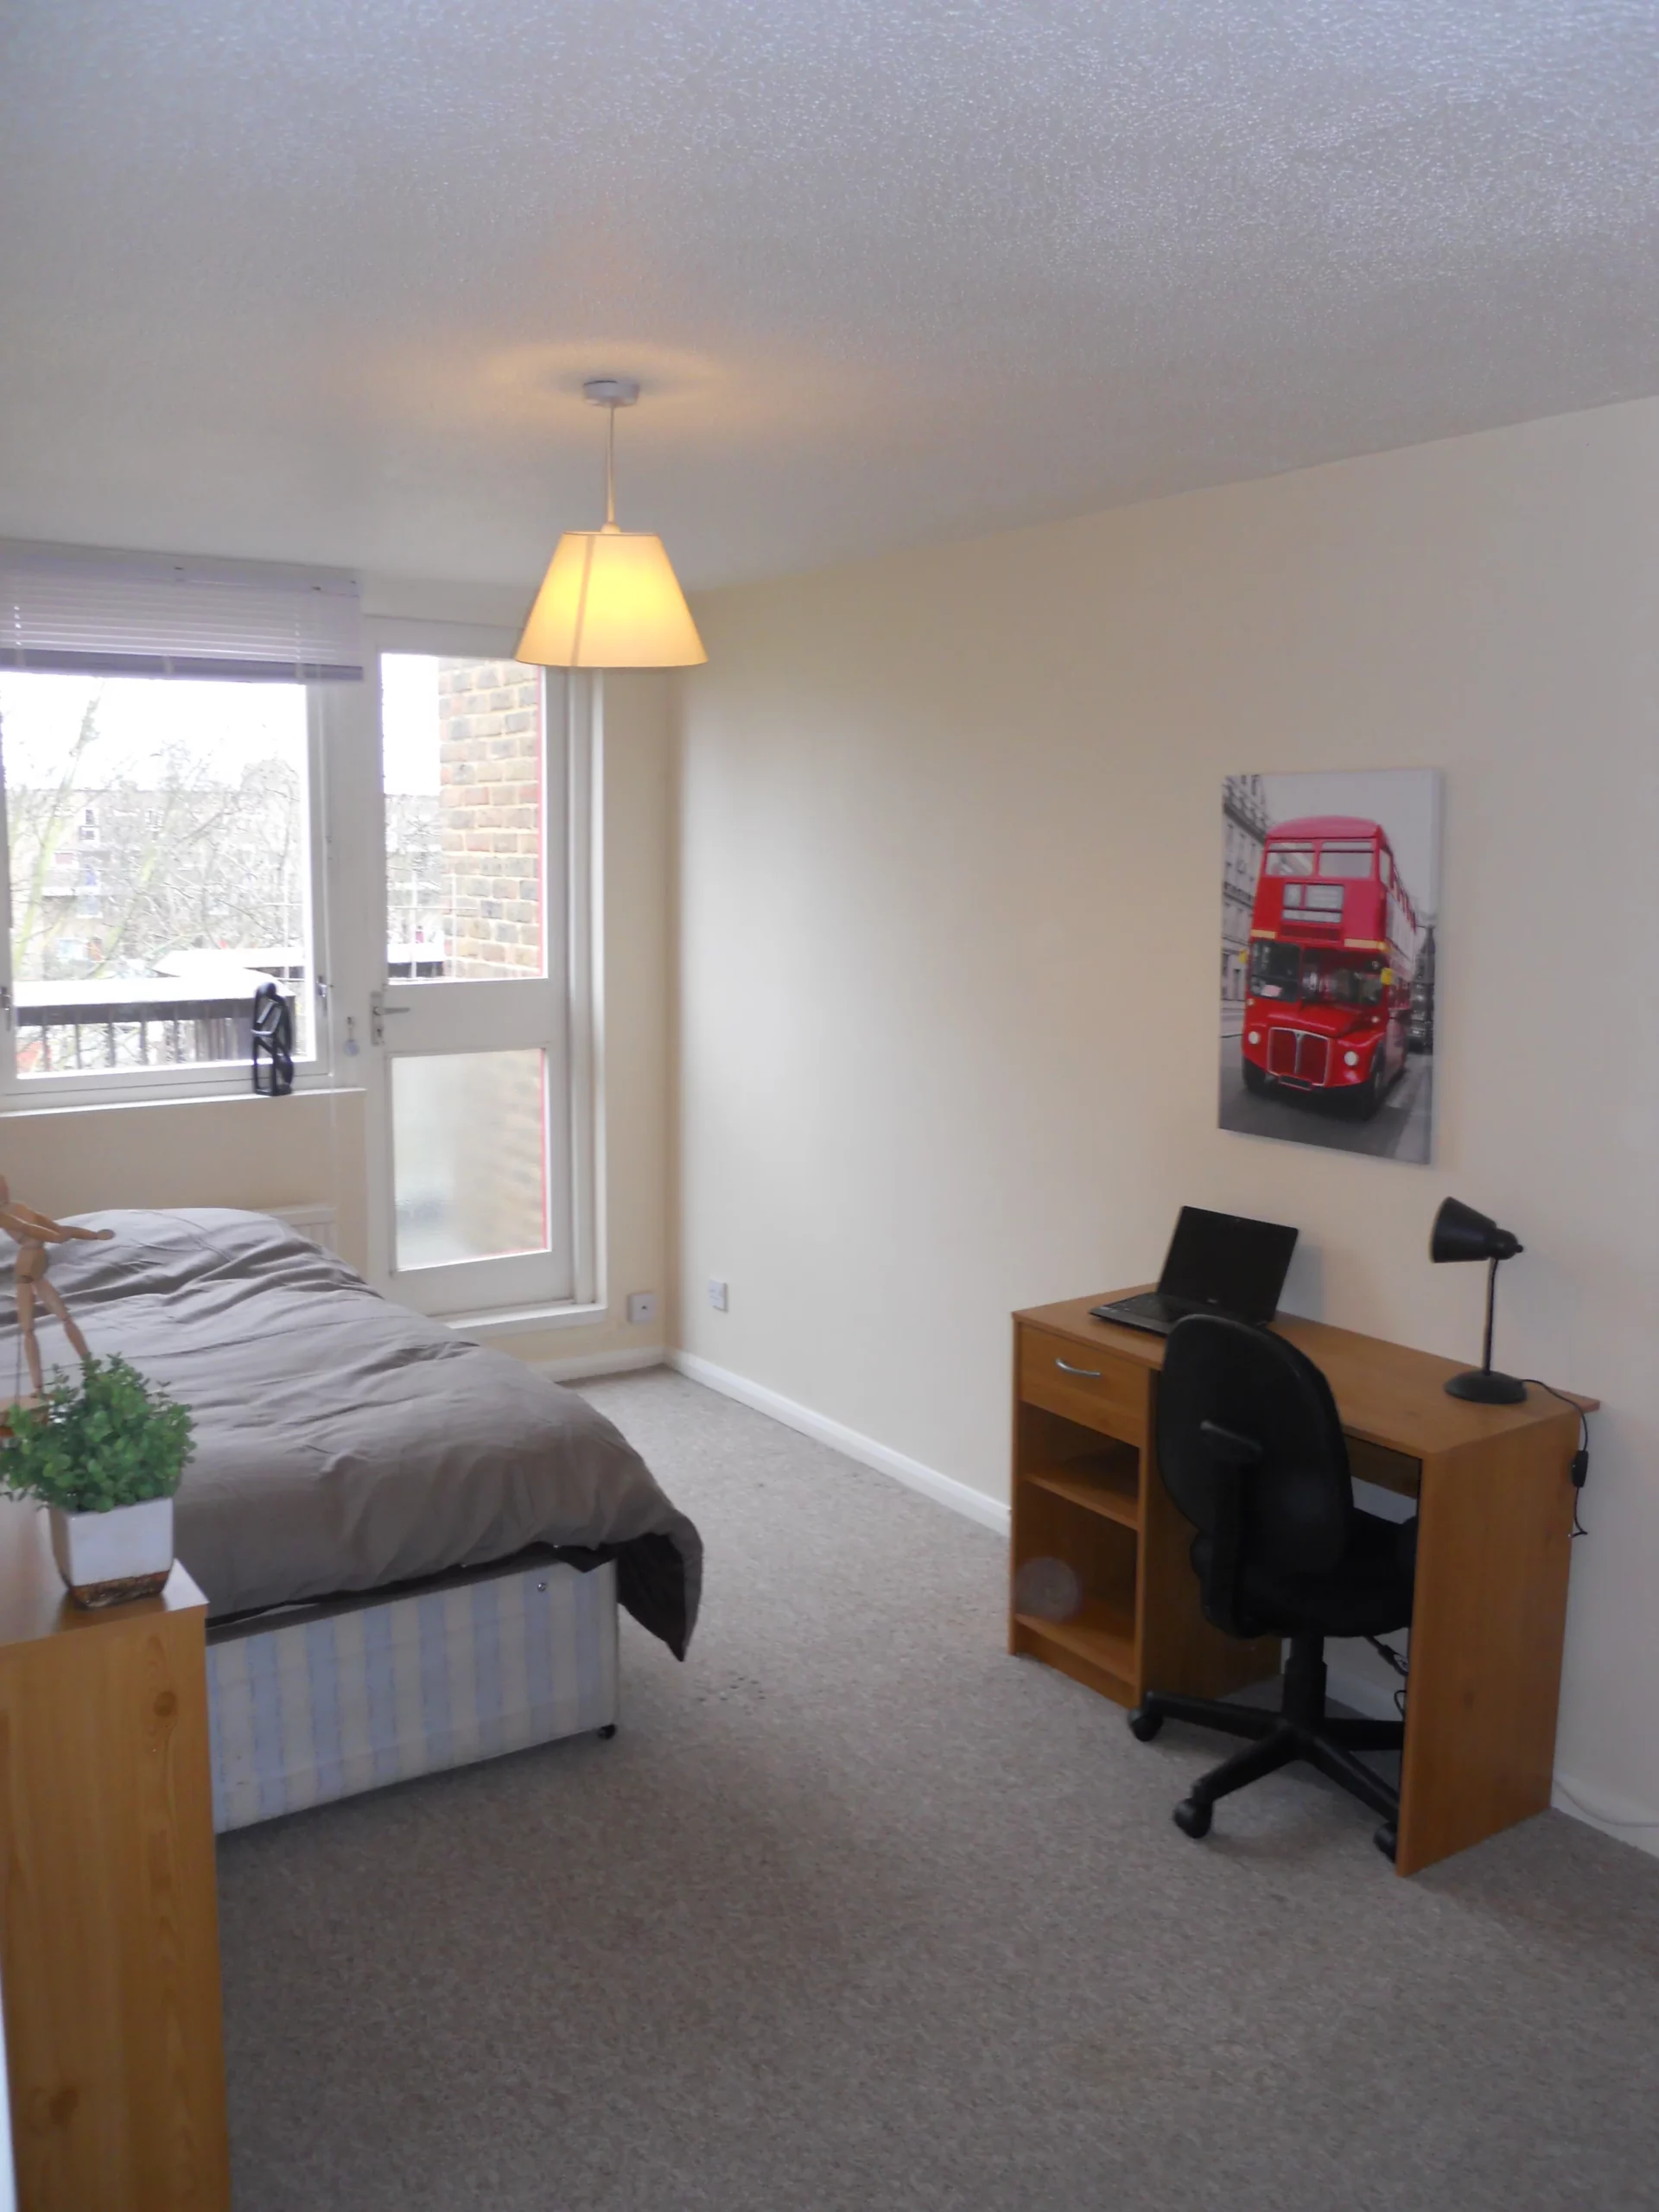 Four Bedroom Flat Located In Bow/Mile End